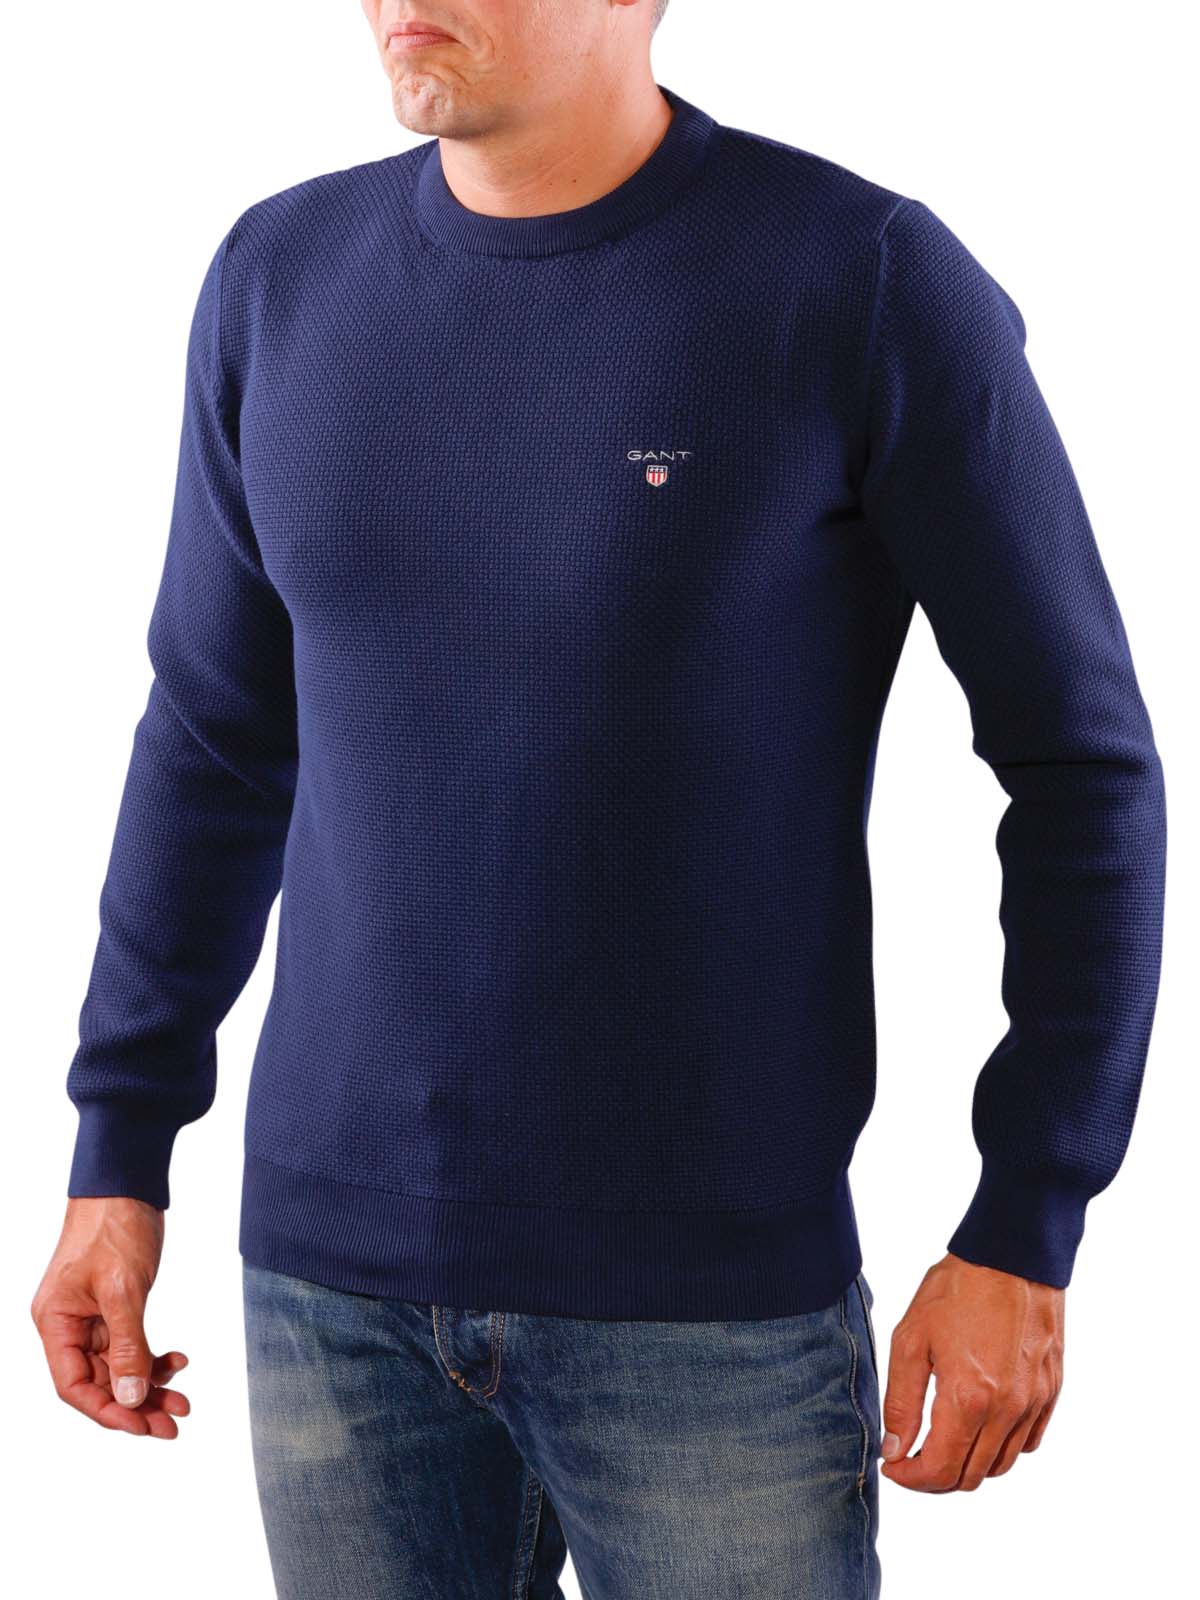 Gant pullovers- casual elegance from New England